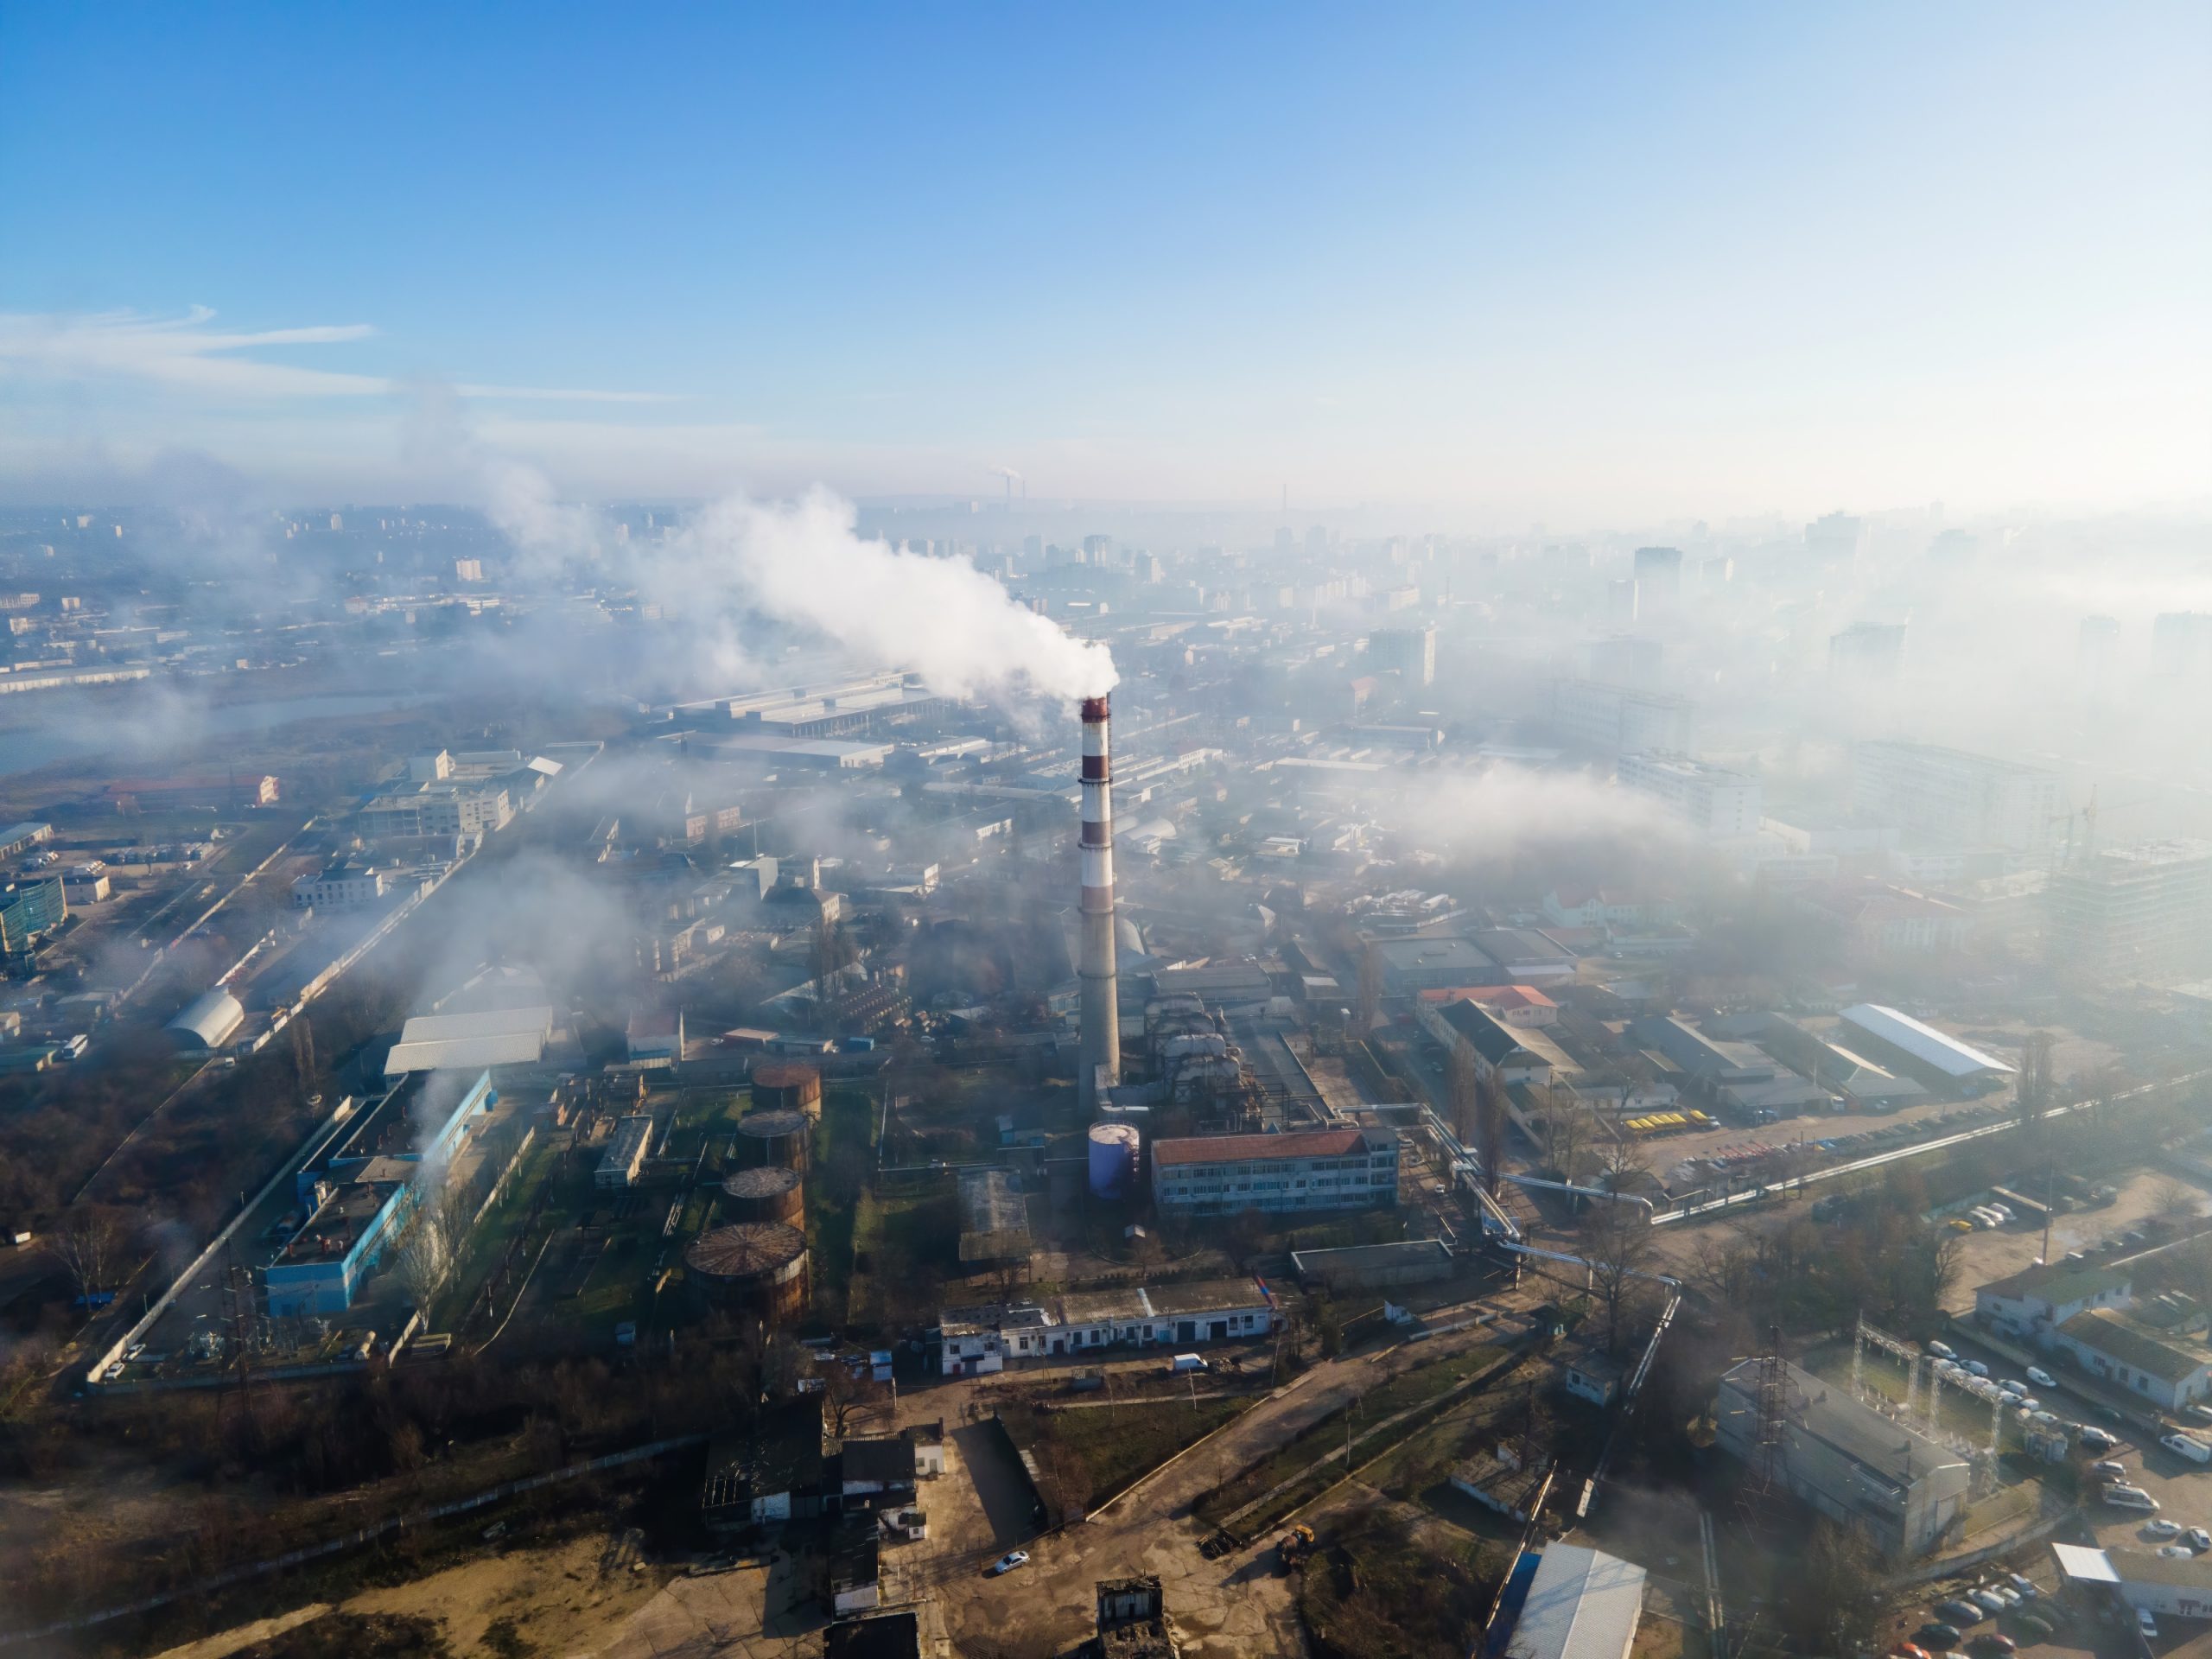 aerial-drone-view-chisinau-thermal-station-with-smoke-coming-out-tube-buildings-roads-fog-air-moldova-1-scaled.jpg